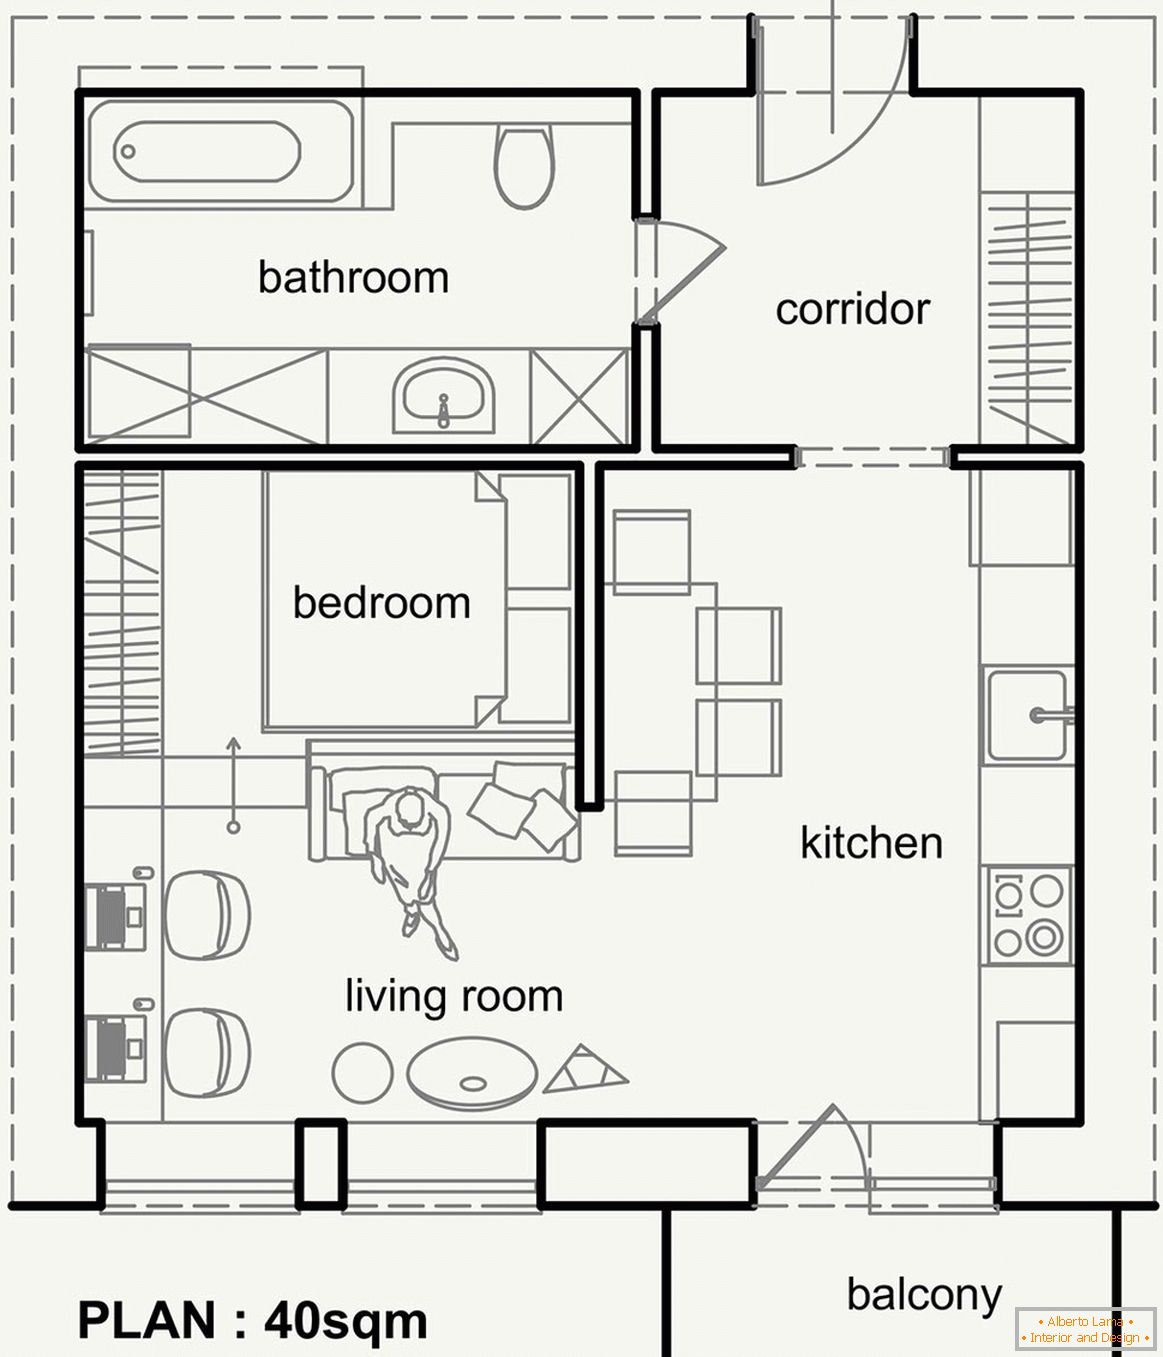 The layout of a small modern apartment